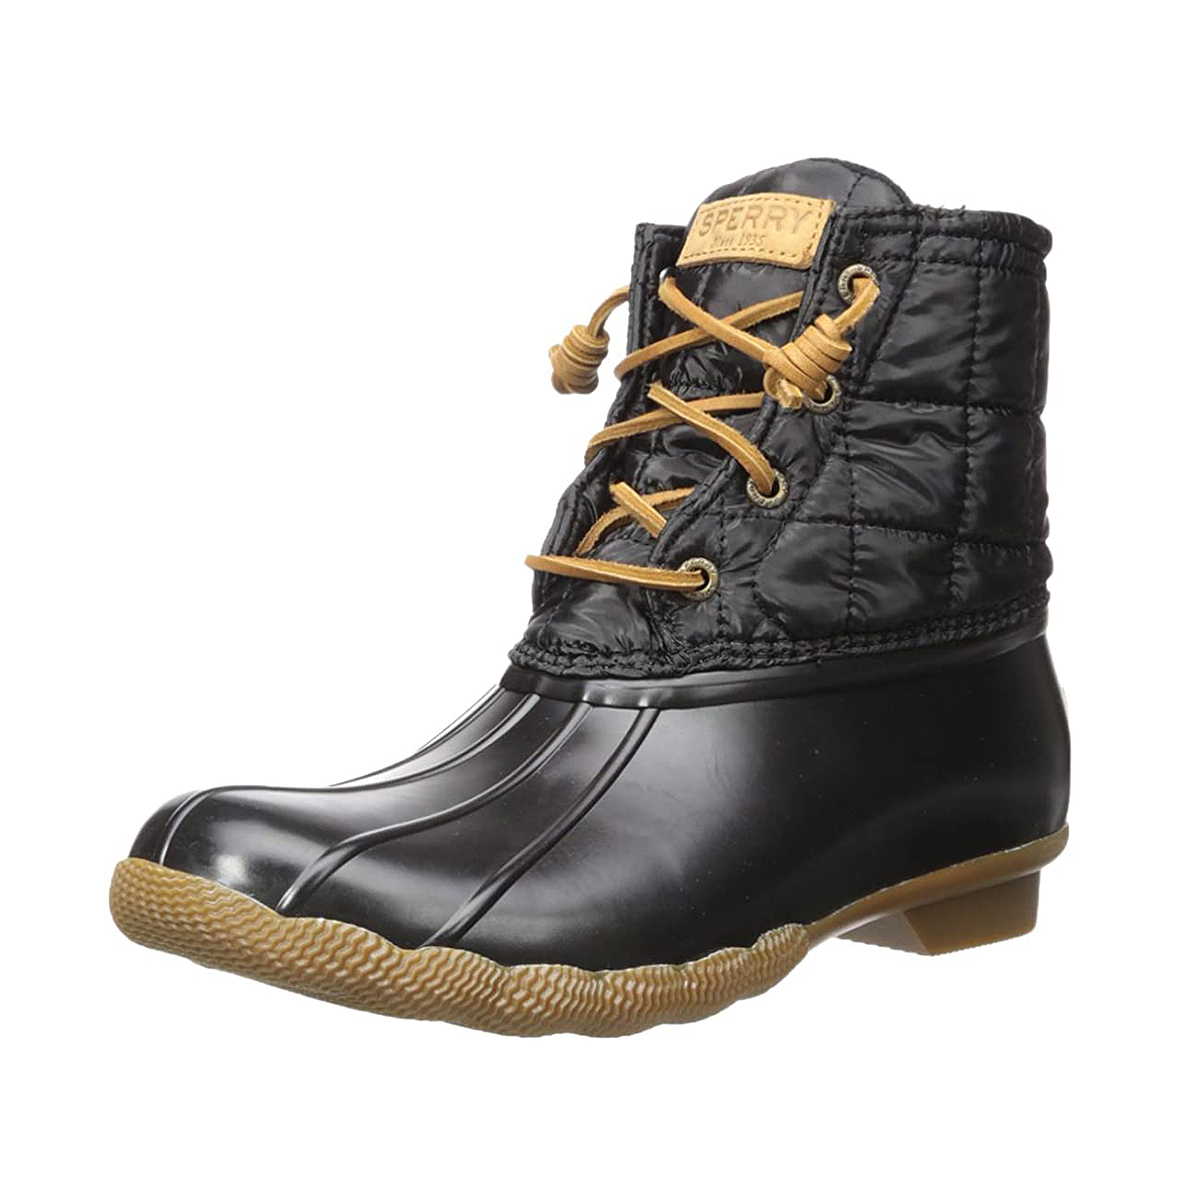 sperry duck boot black friday sale